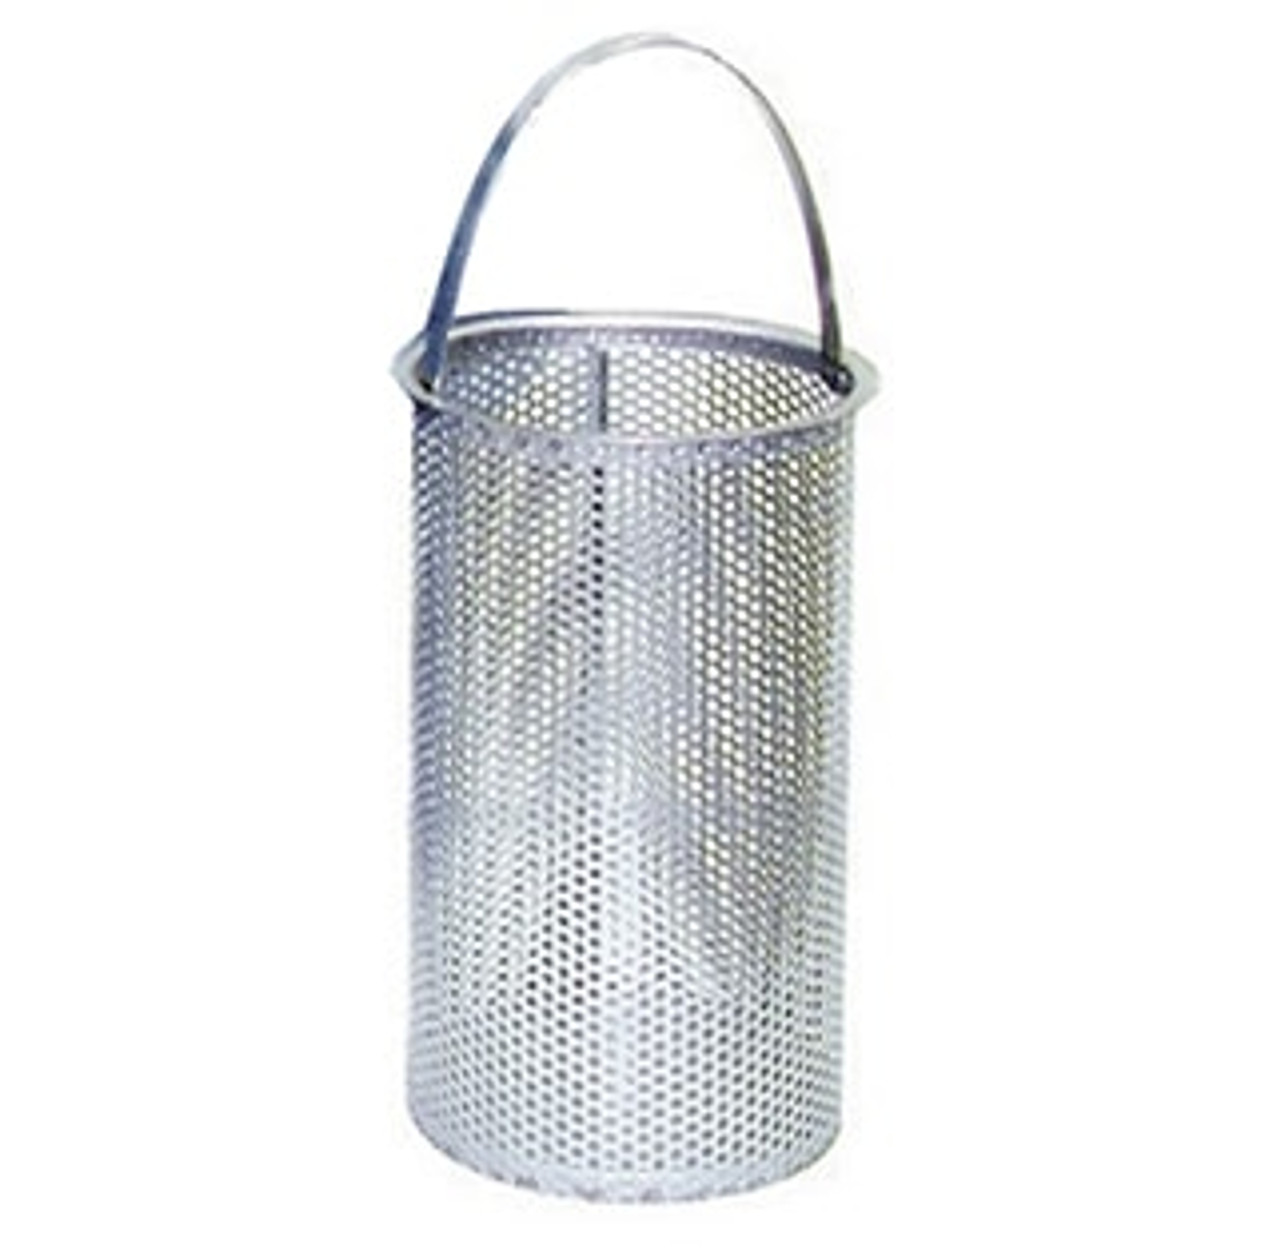 40 Mesh with 5/32" Perforated Replacement Basket for 1.25"-1.5" Eaton Model 53BTX Strainer